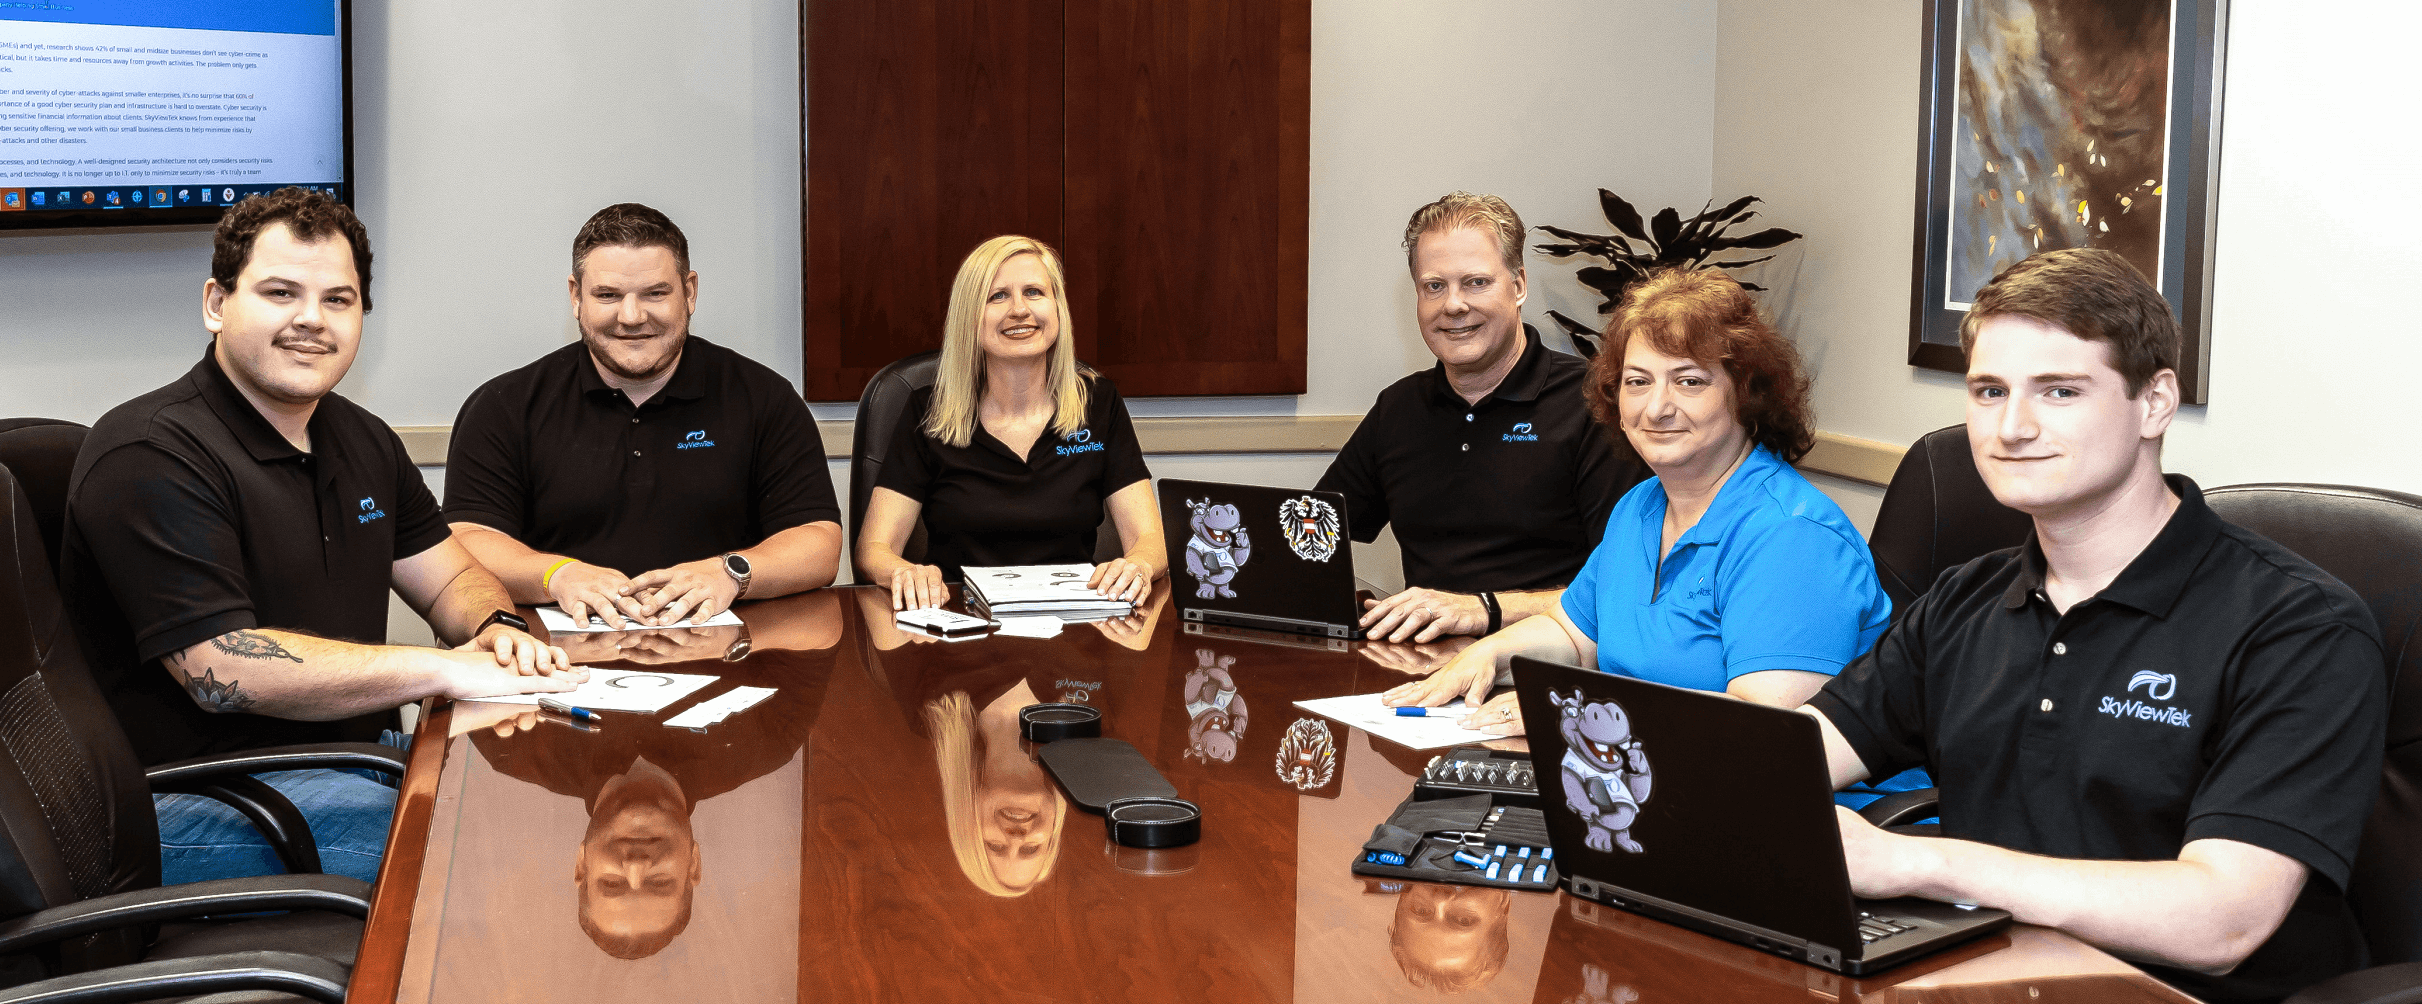 Pictured is the SkyViewTek team from an early March meeting. From left to right: Eric Gibbs, Bernie Orglmeister, Susan Dykas, and Andrea Blenk. We are here for you.